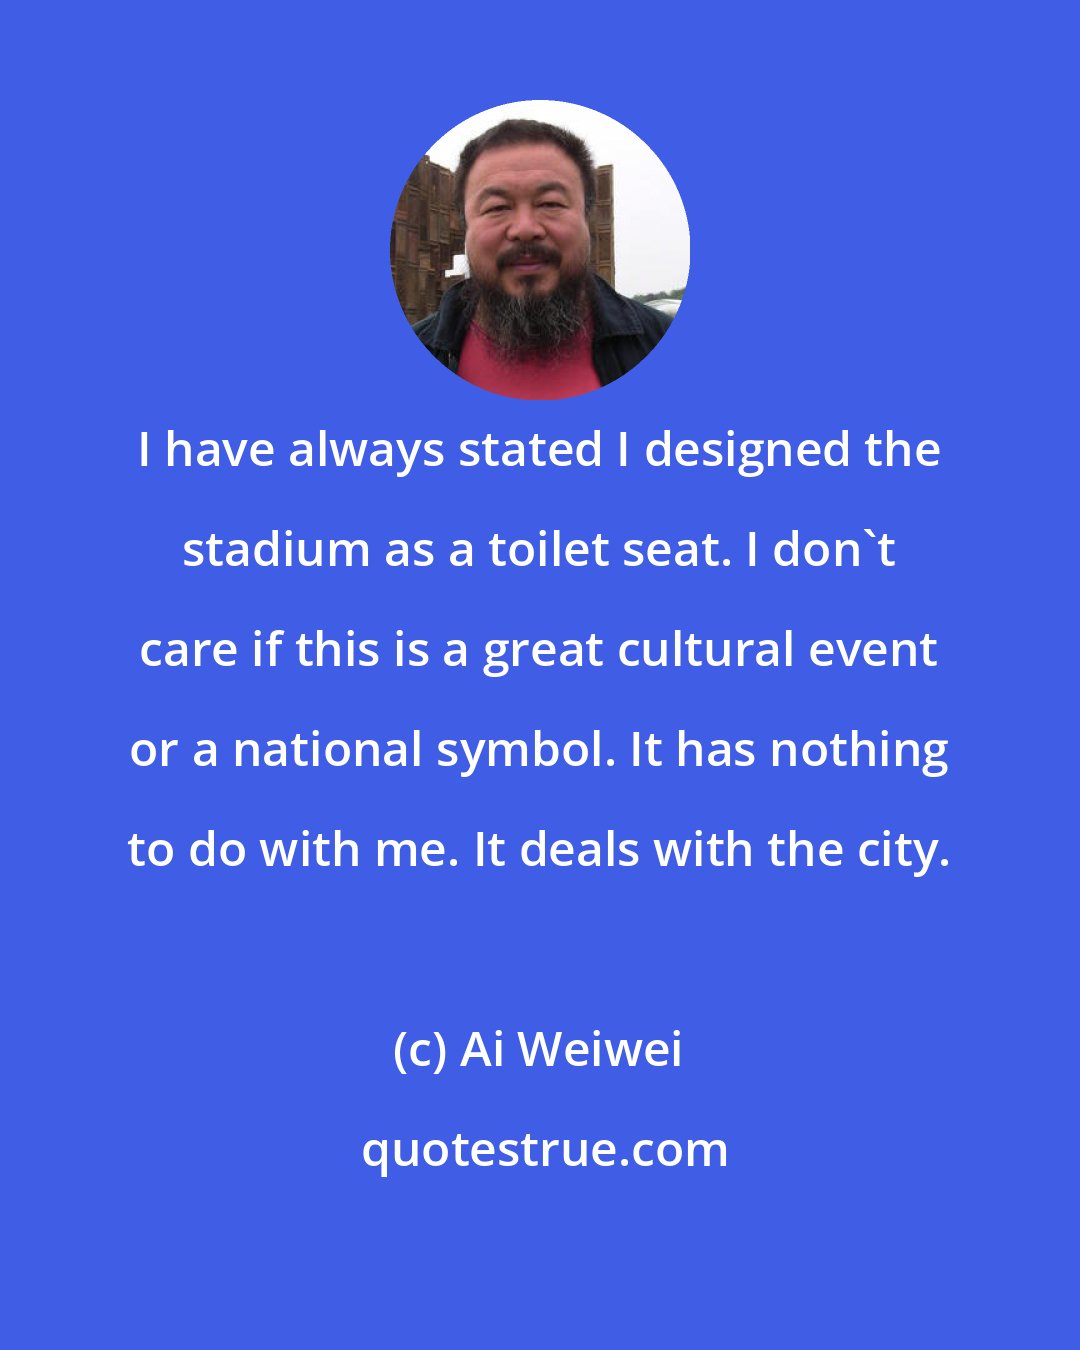 Ai Weiwei: I have always stated I designed the stadium as a toilet seat. I don't care if this is a great cultural event or a national symbol. It has nothing to do with me. It deals with the city.